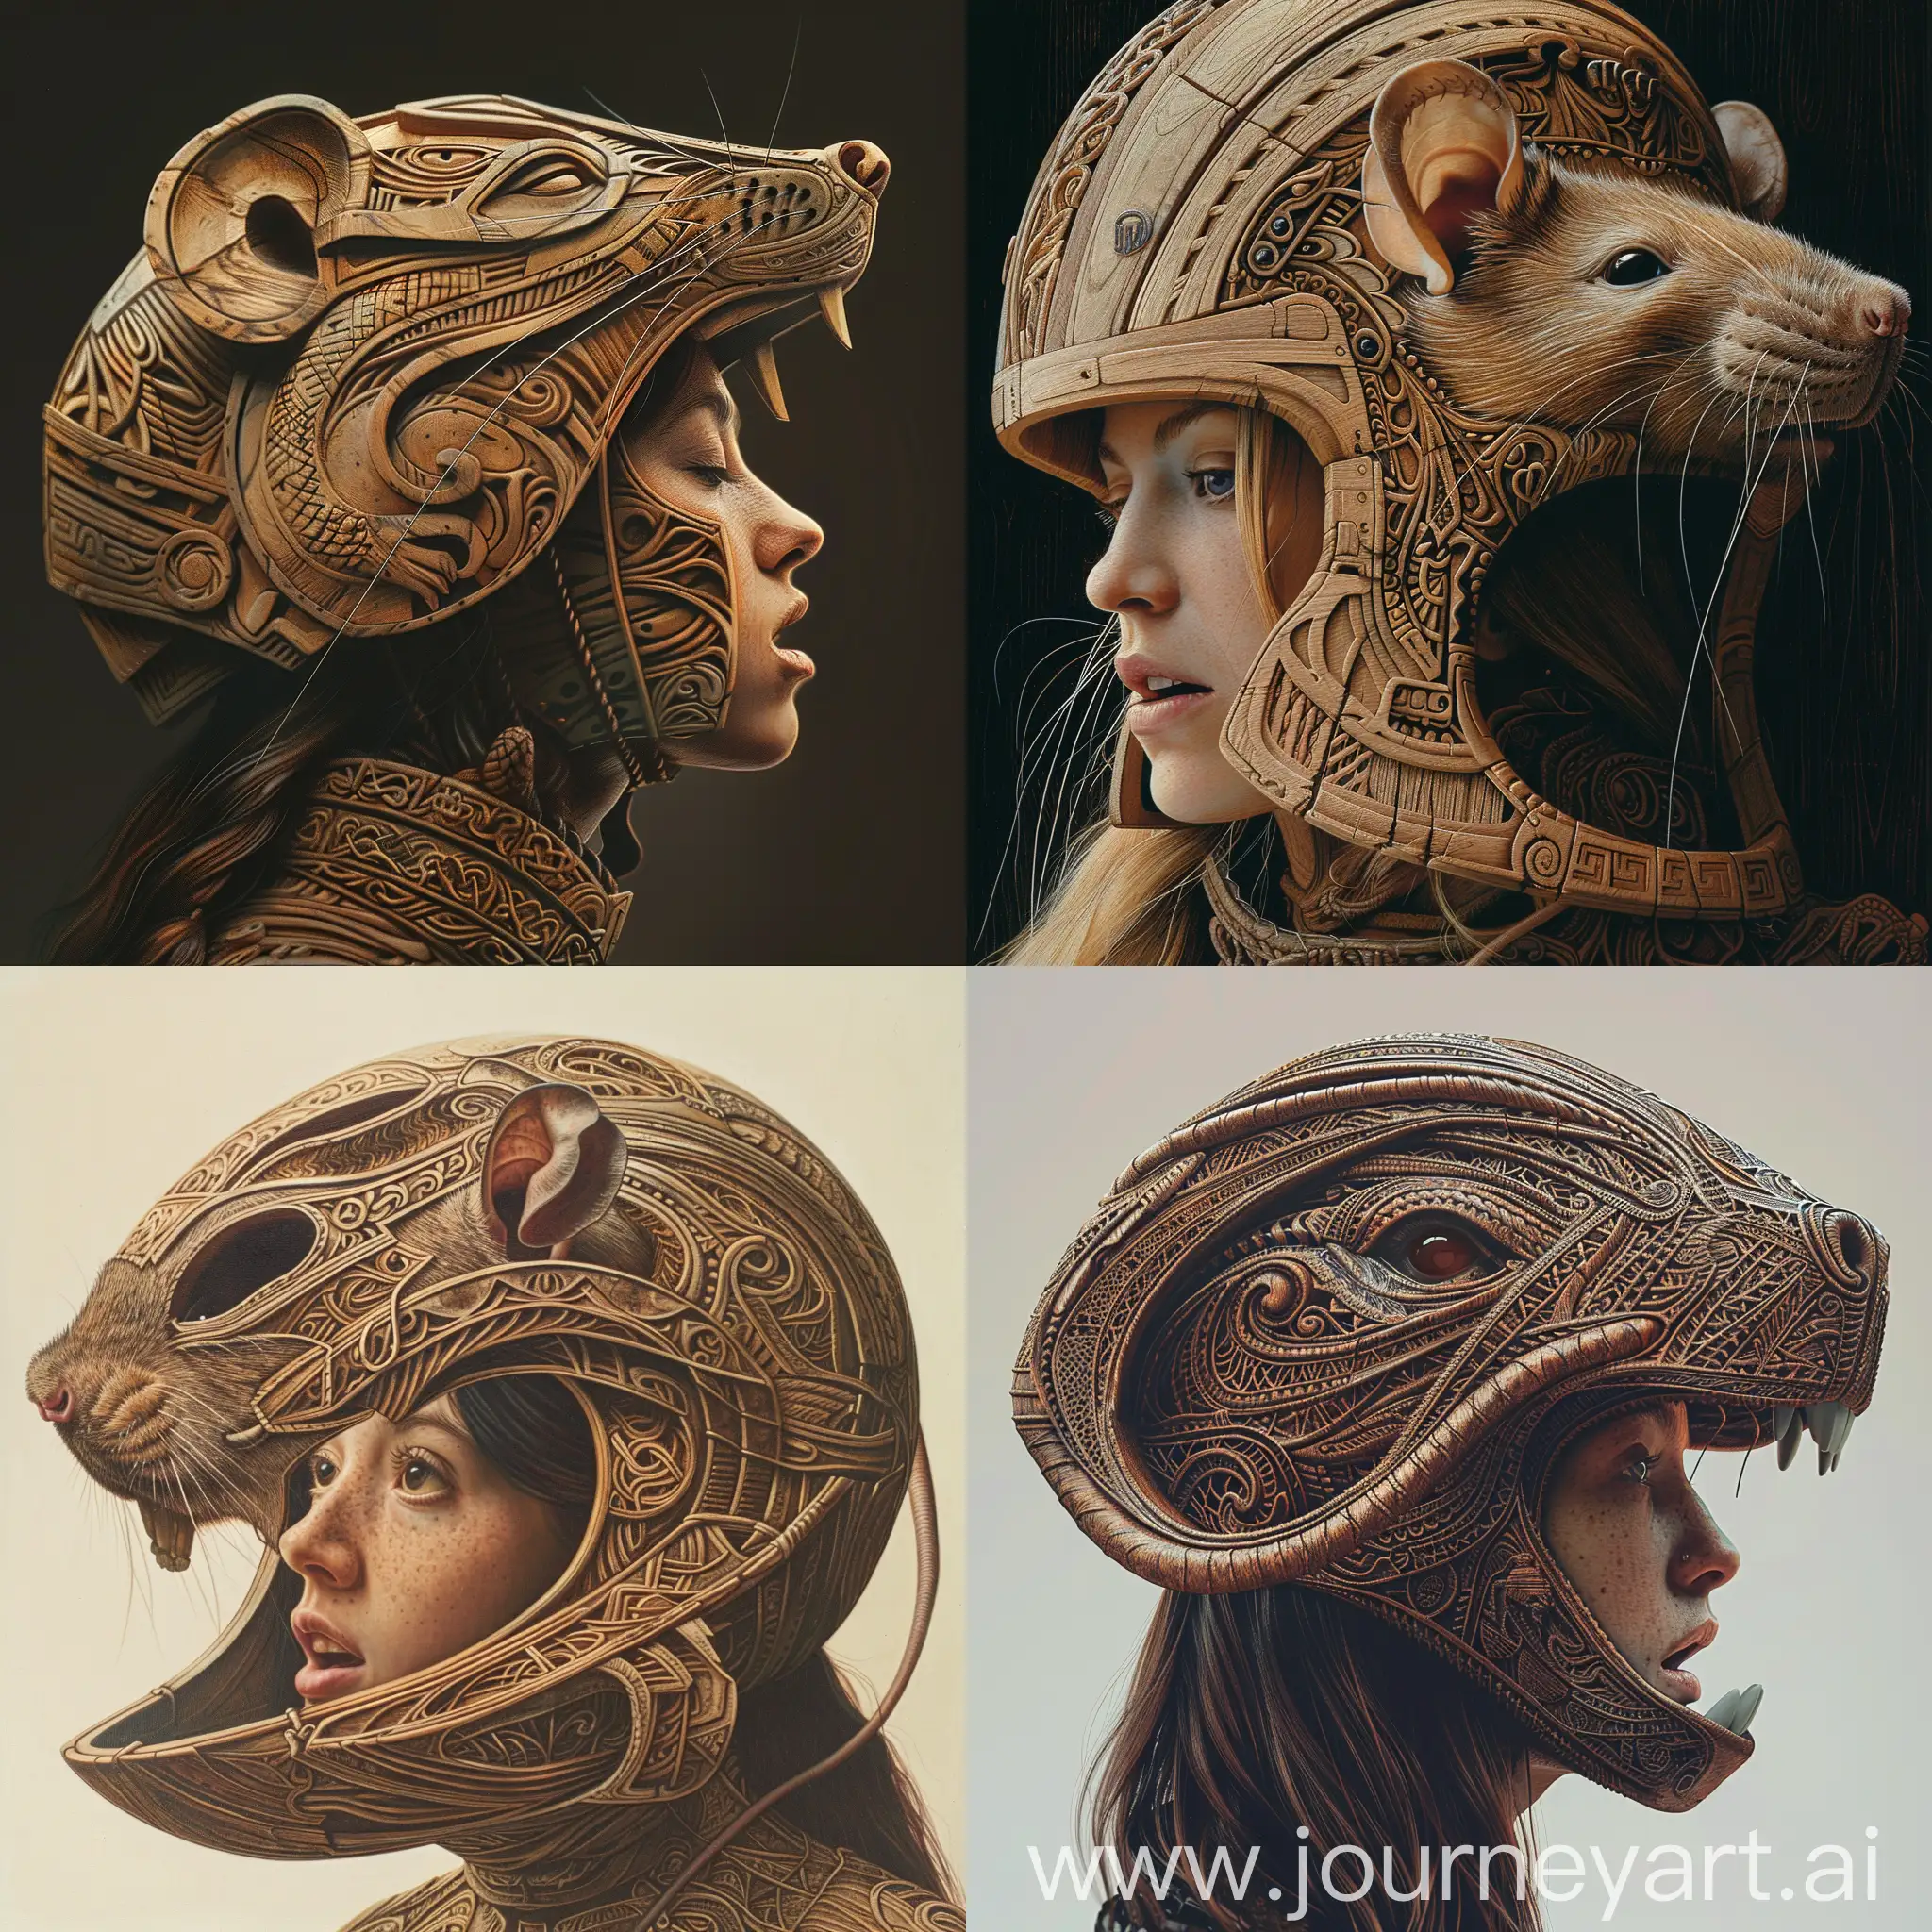 Intricately-Carved-Wooden-Rat-Face-Helmet-Worn-by-Woman-in-34-Angle-Perspective